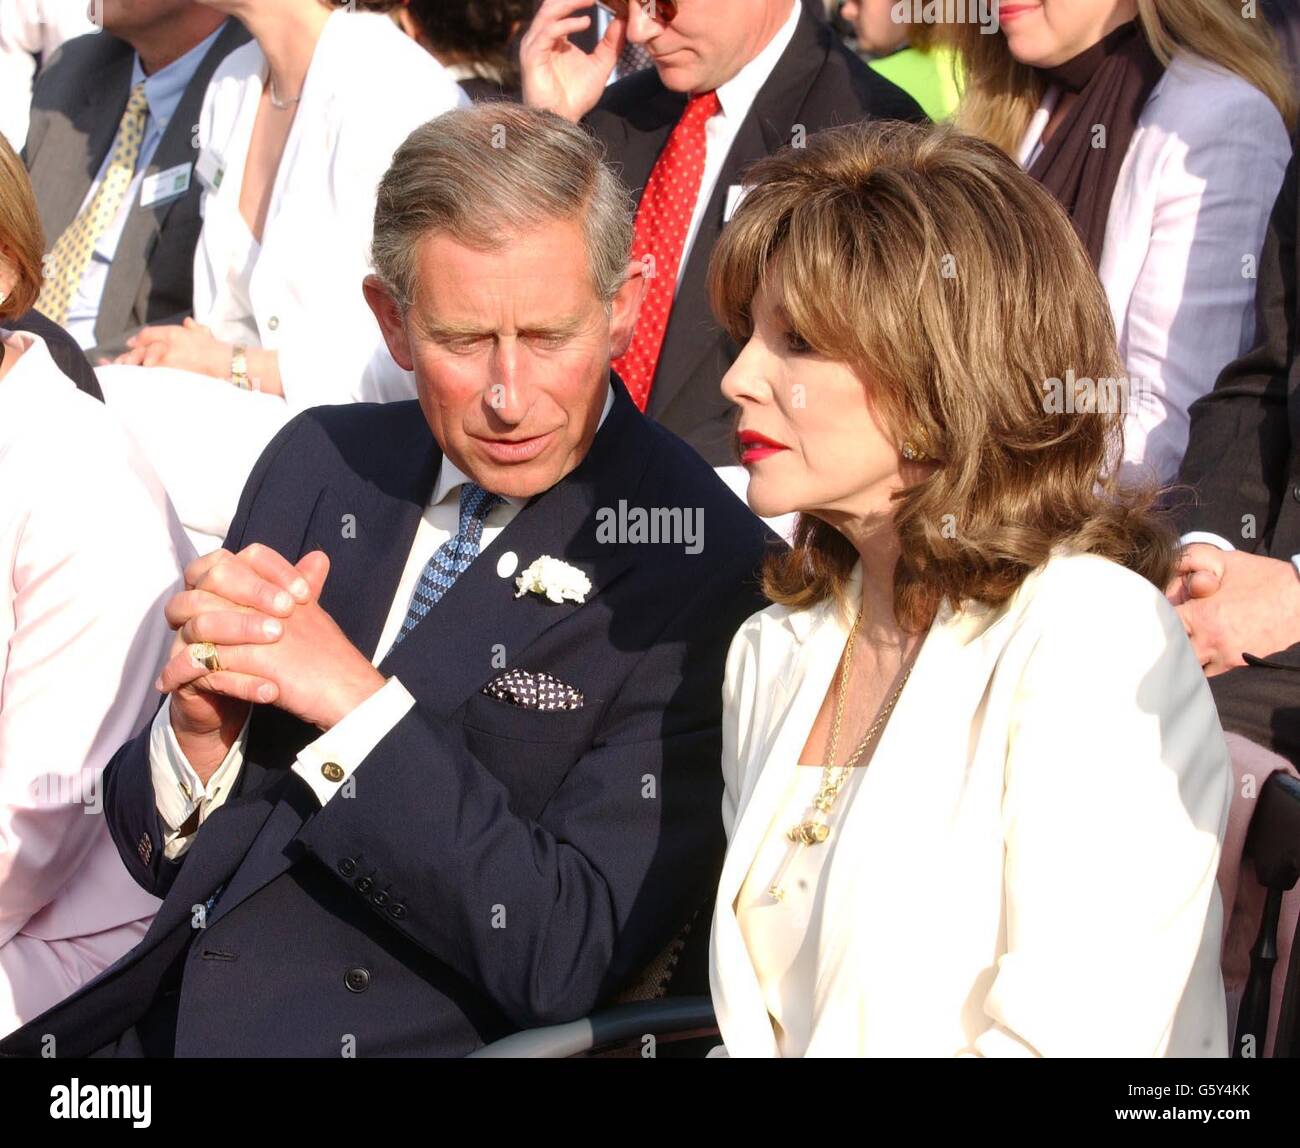 The Prince of Wales with Joan Collins as they watch Diana Ross perform at the Safeway Picnic 2002 in London's Hyde Park. Stock Photo